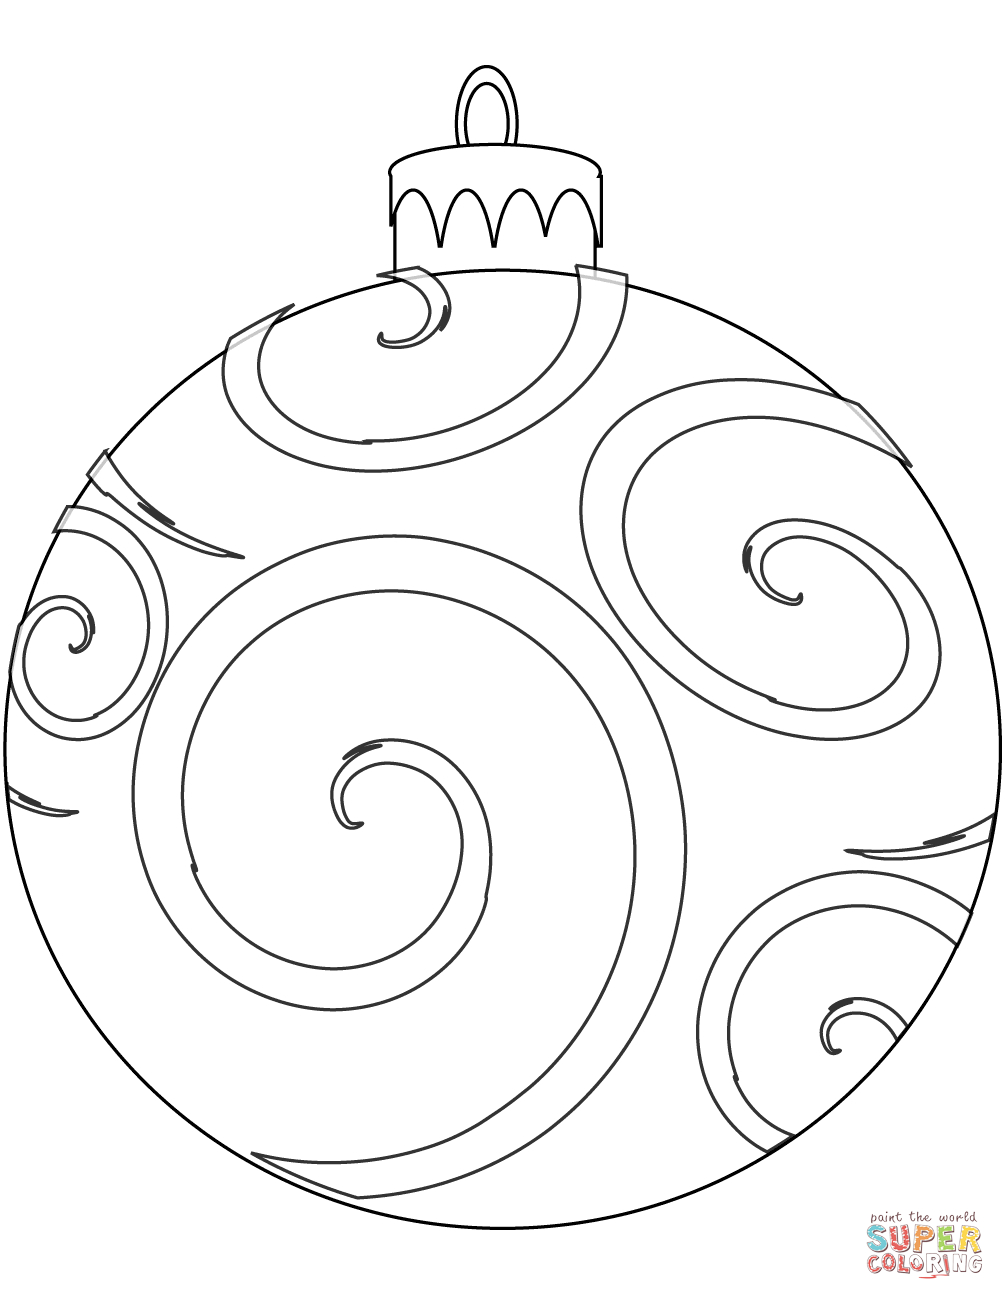 Holiday Ornament Coloring Page | Free Printable Coloring Pages - Free Printable Ornaments To Color